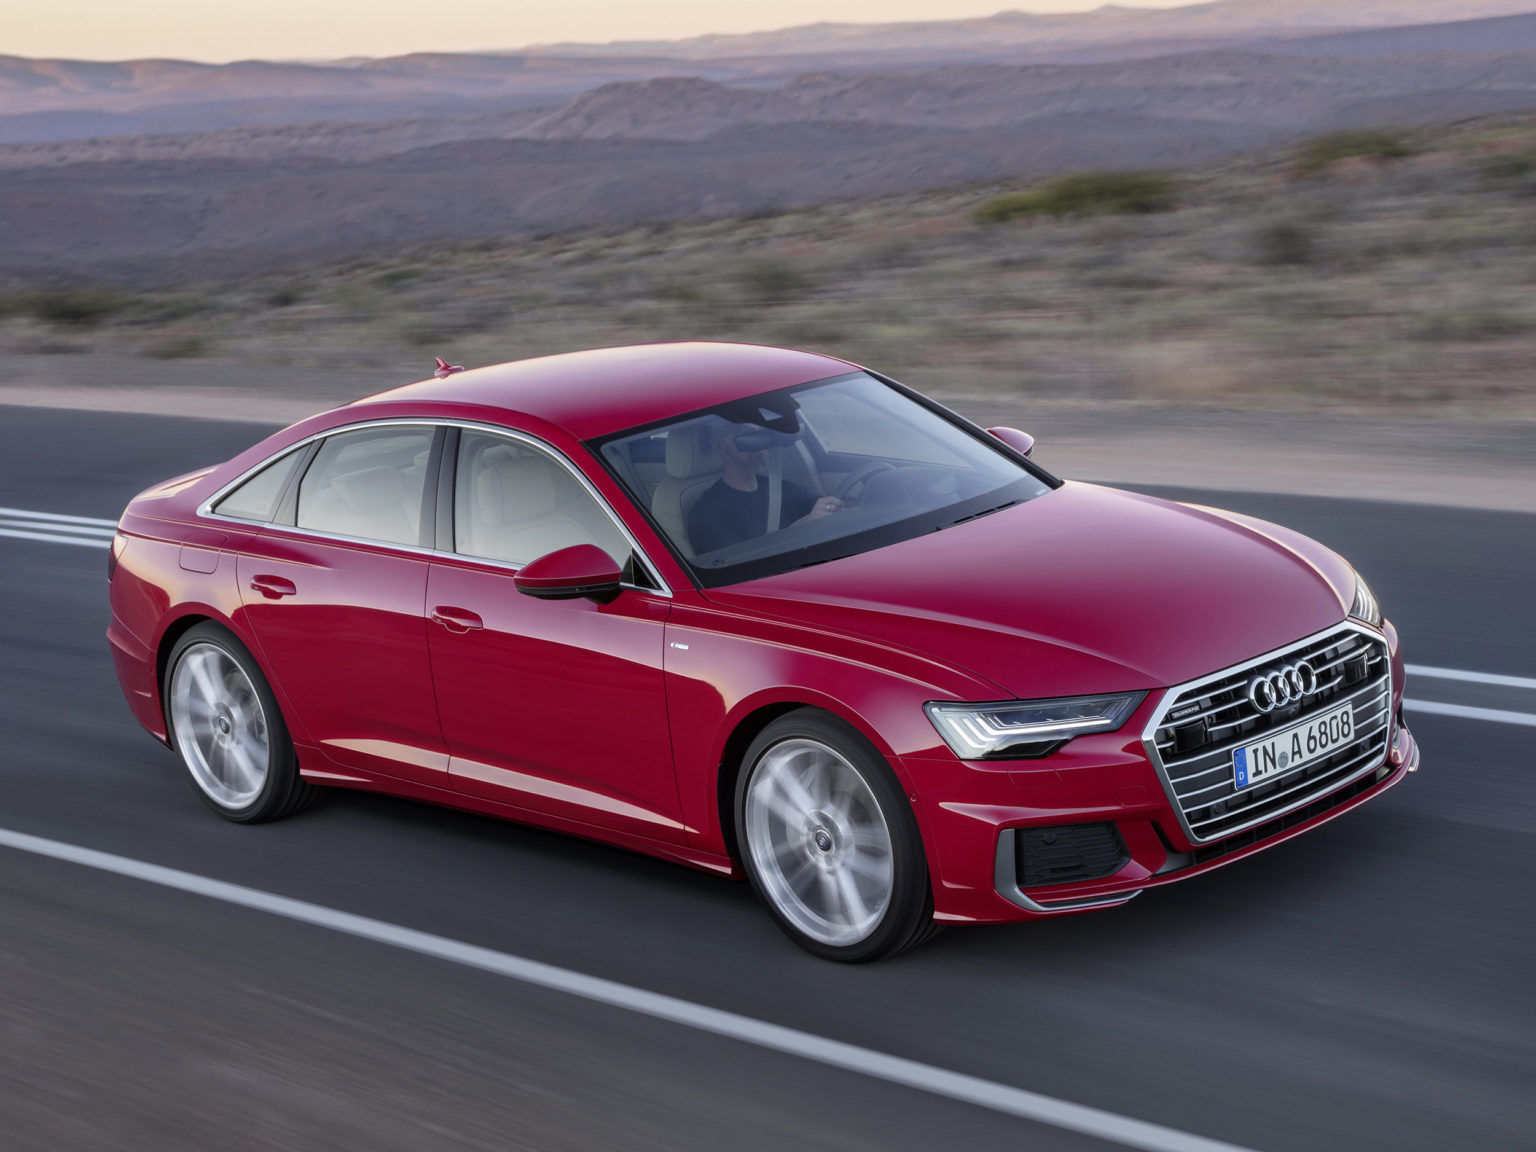 This Audi A6 sports a Red Metallic paint job.